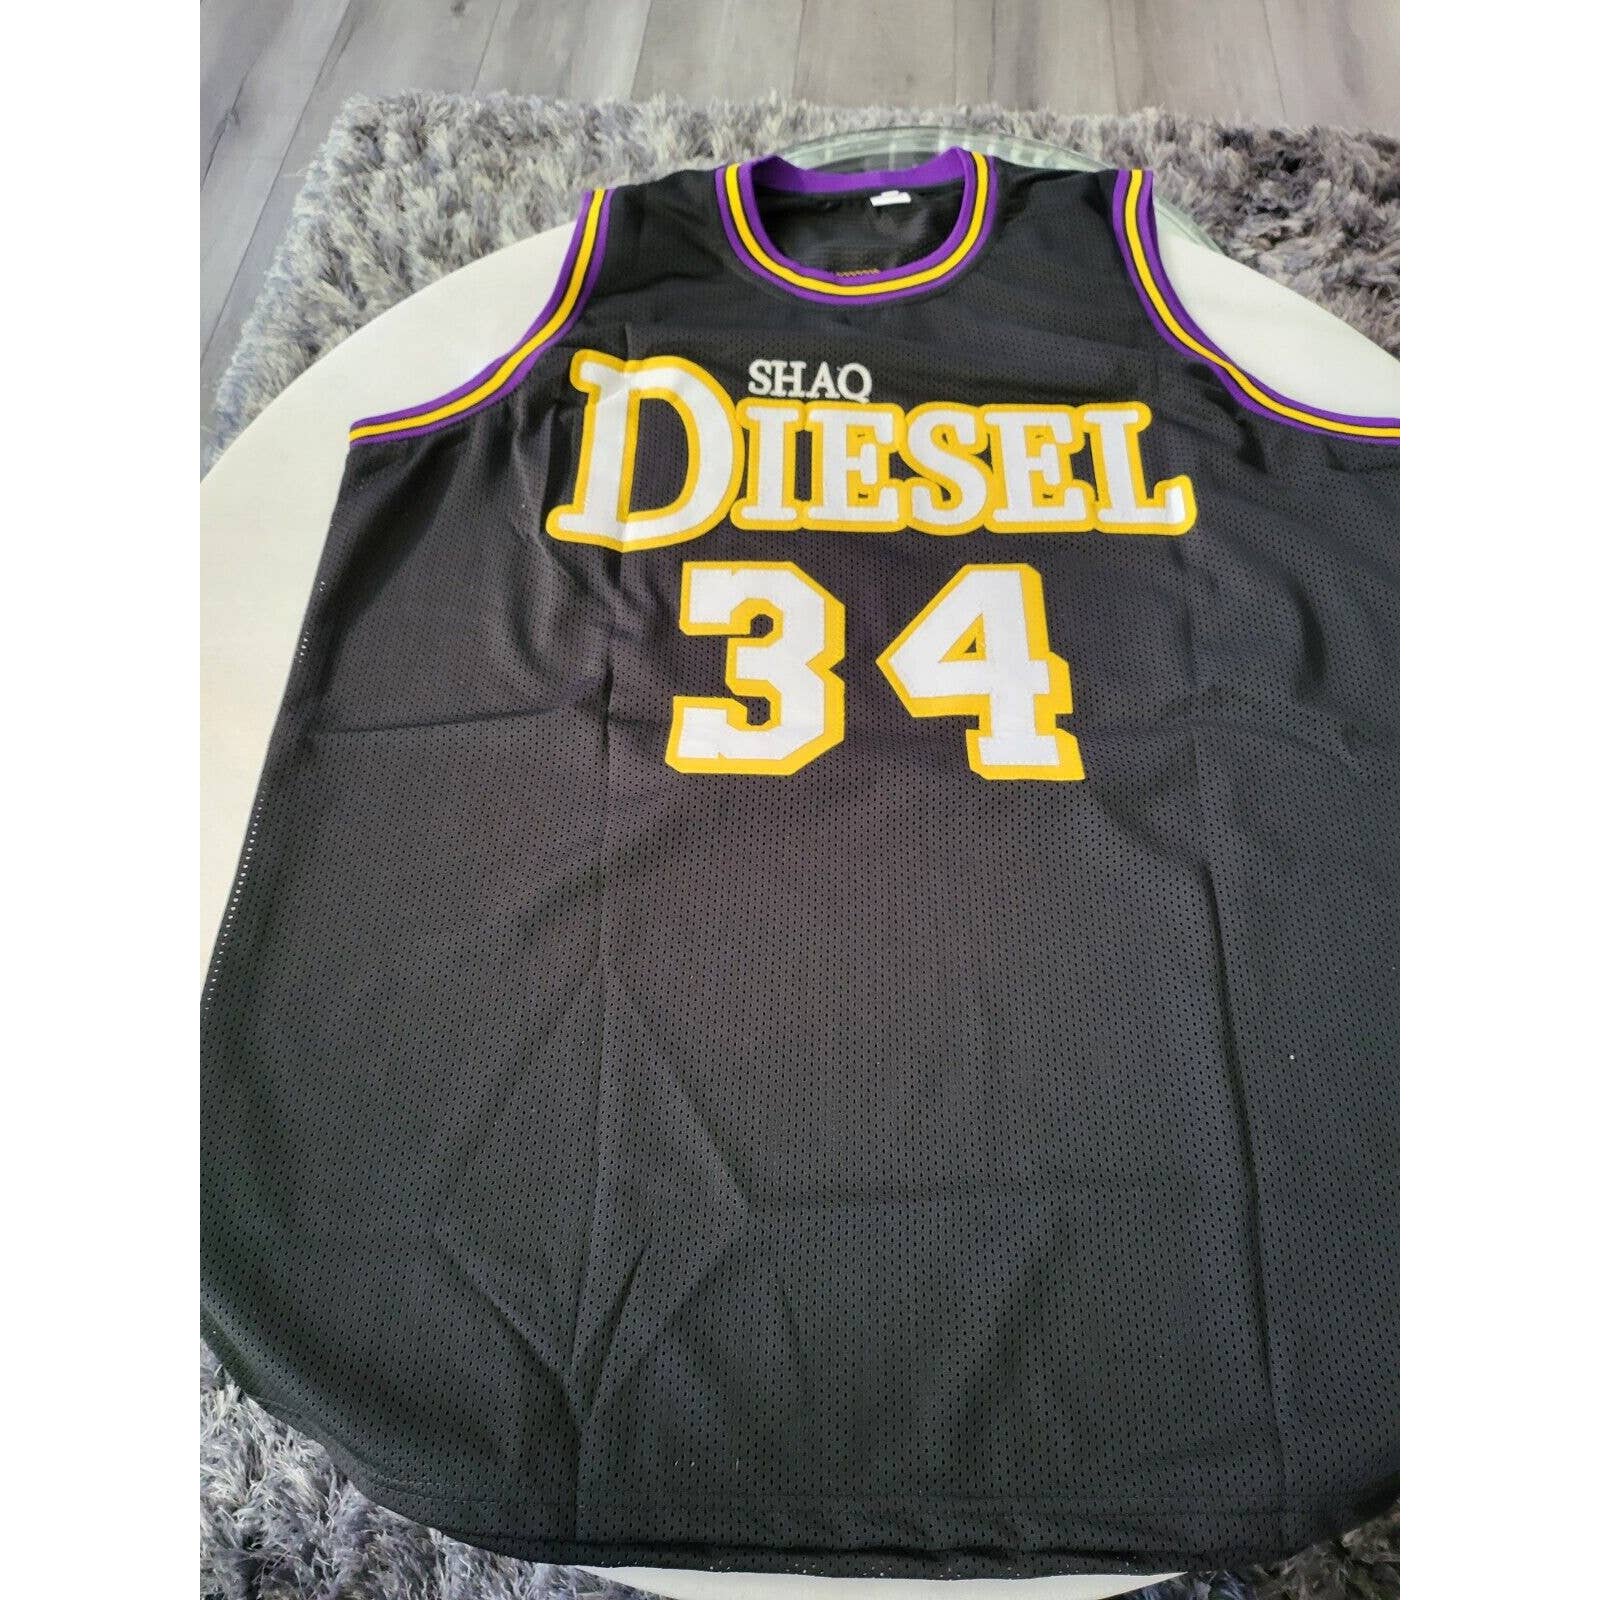 Shaquille O’Neal Autographed/Signed Jersey JSA COA Los Angeles Lakers - TreasuresEvolved